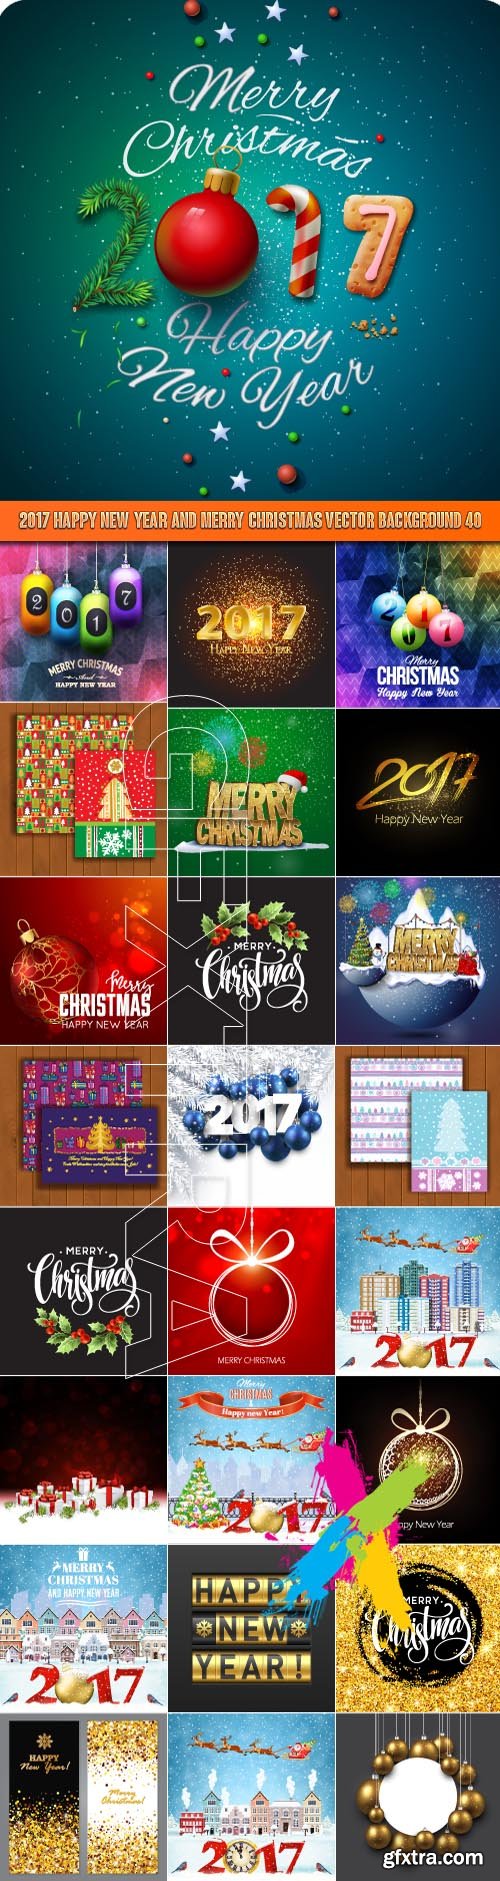 2017 Happy New Year and Merry Christmas vector background 40